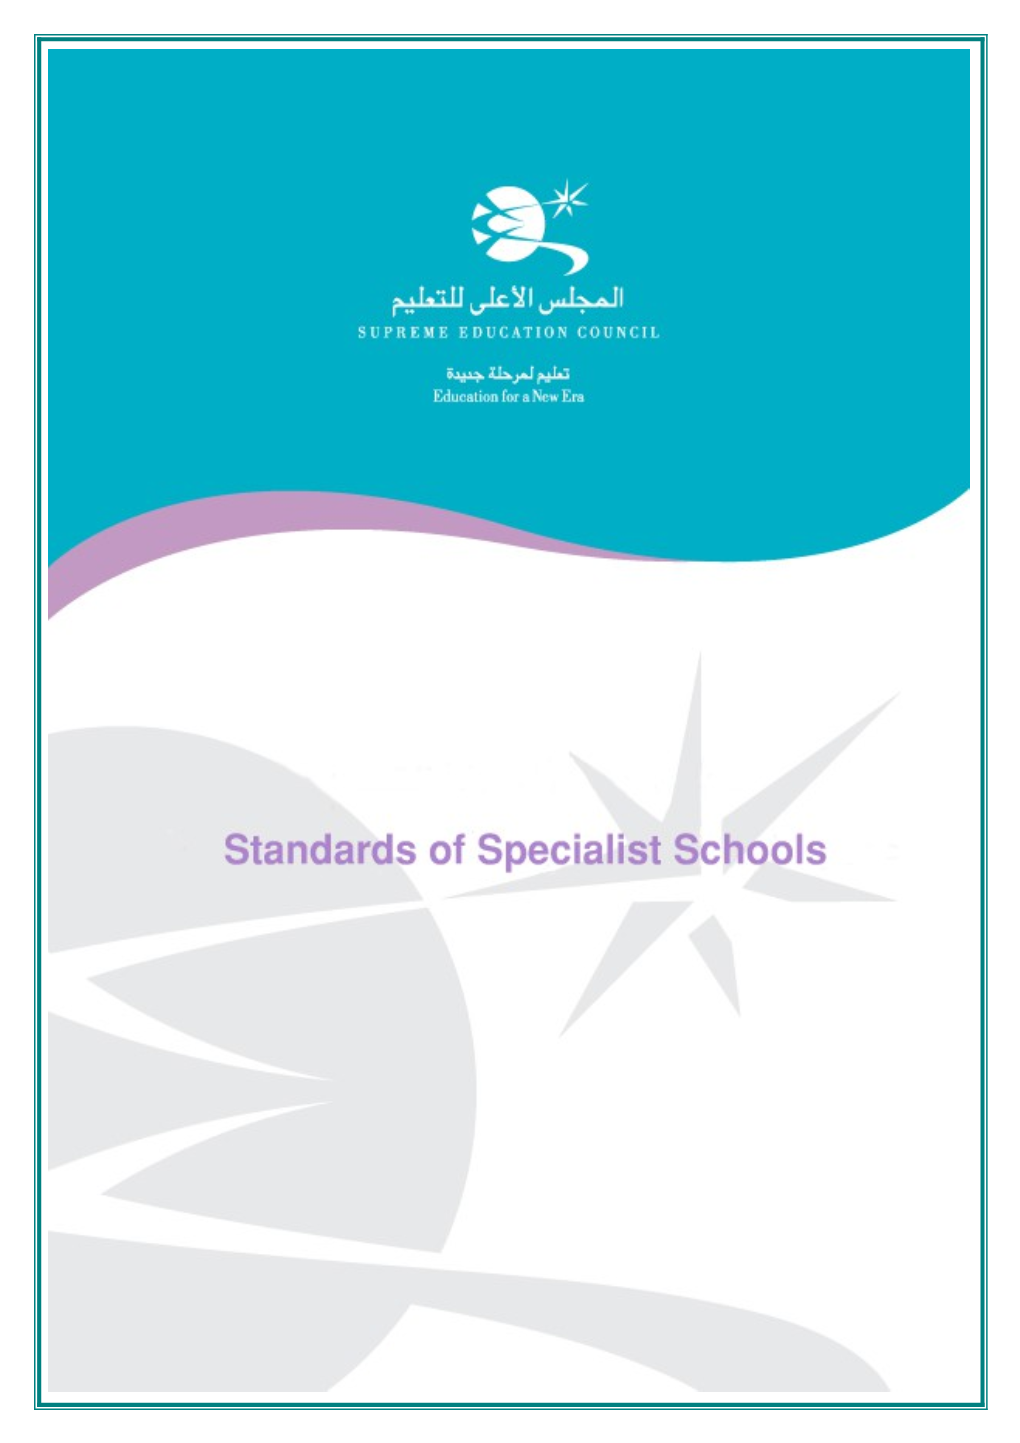 Standards of Specialist Schools for Students with Additional Educational Support Needs